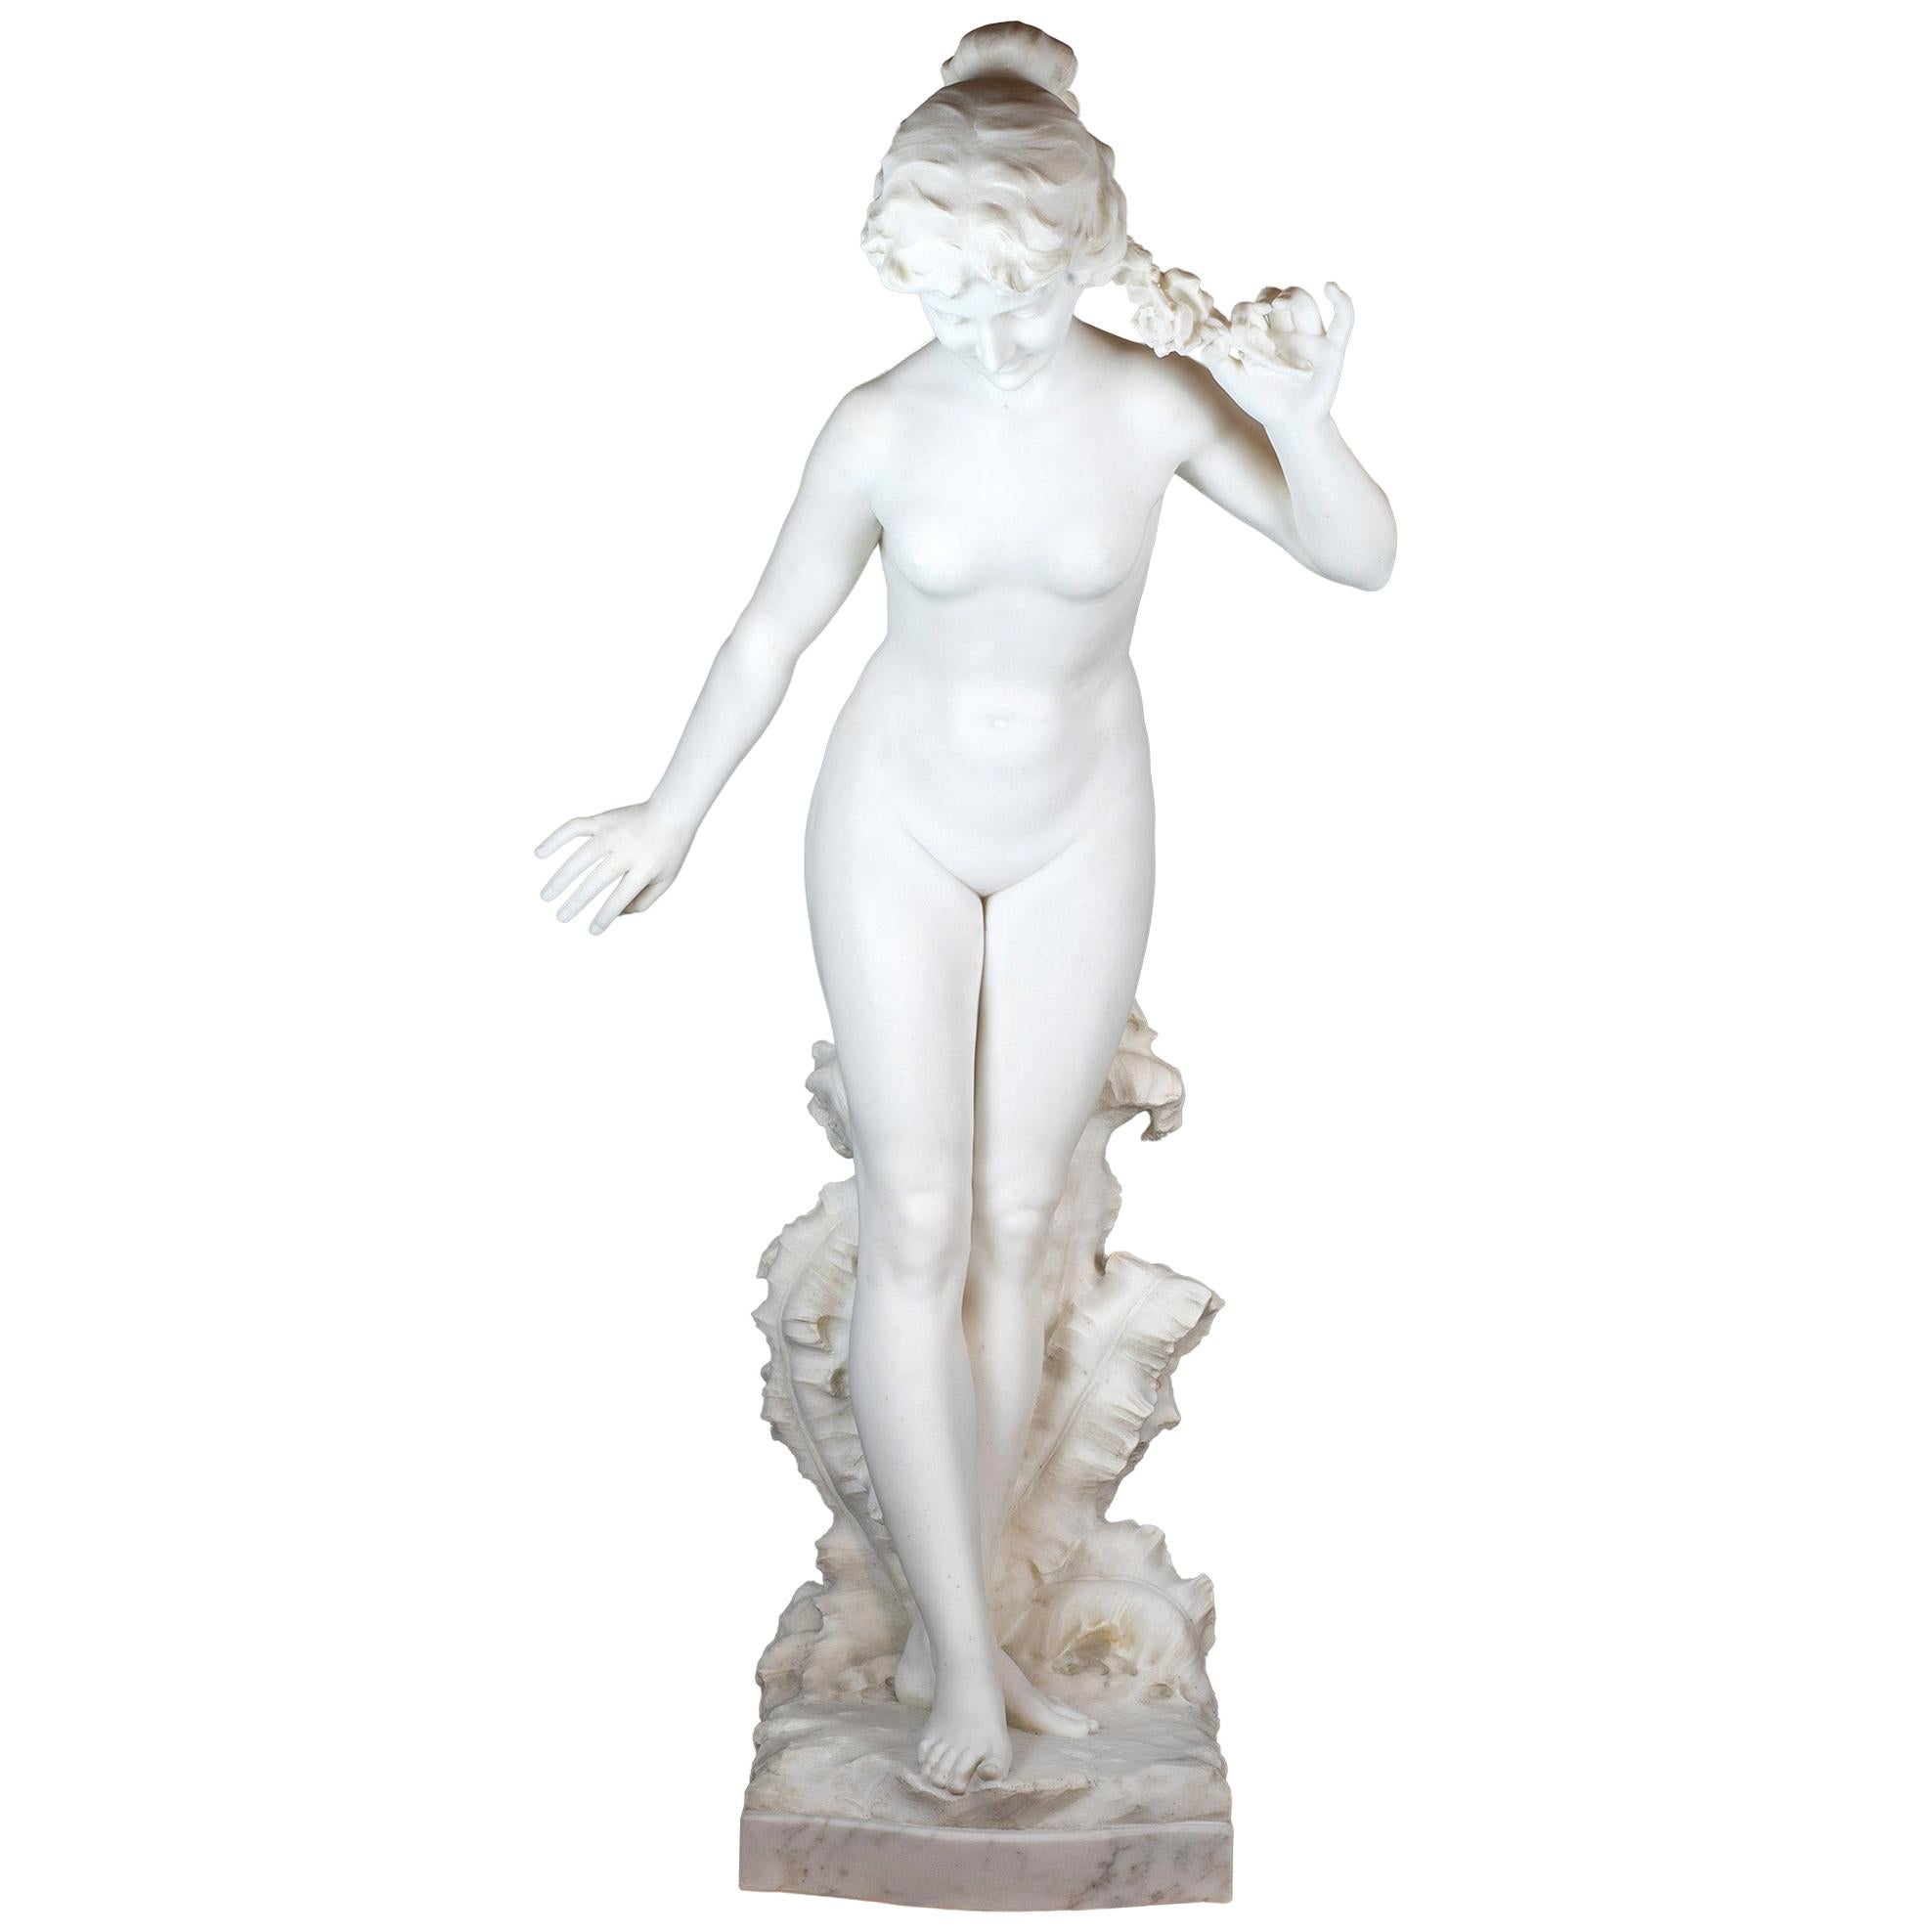 Finely carved Italian Carrara marble statue of a nude beauty signed Prof Petrilli/Galleria Bazzanti/Firenze. Comes in a pairing with marble pedestal in last photo. 

Title: Flora (Allegory of Spring)
Artist: Aristide Petrilli (Italian,